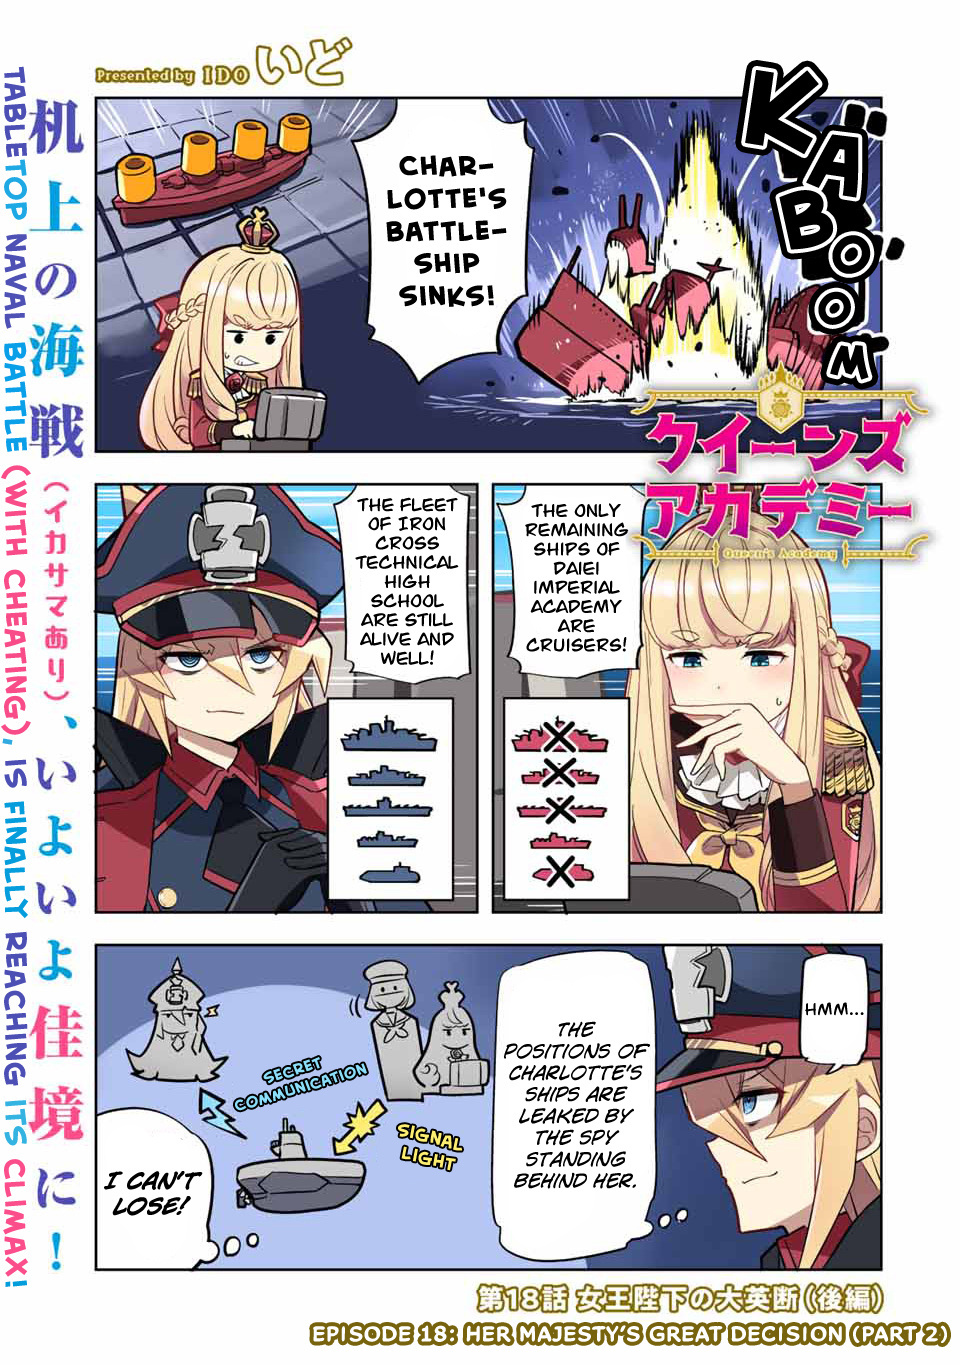 Queen's Academy Vol.3 Chapter 18: Her Majesty's Great Decision (Part 2) - Picture 2